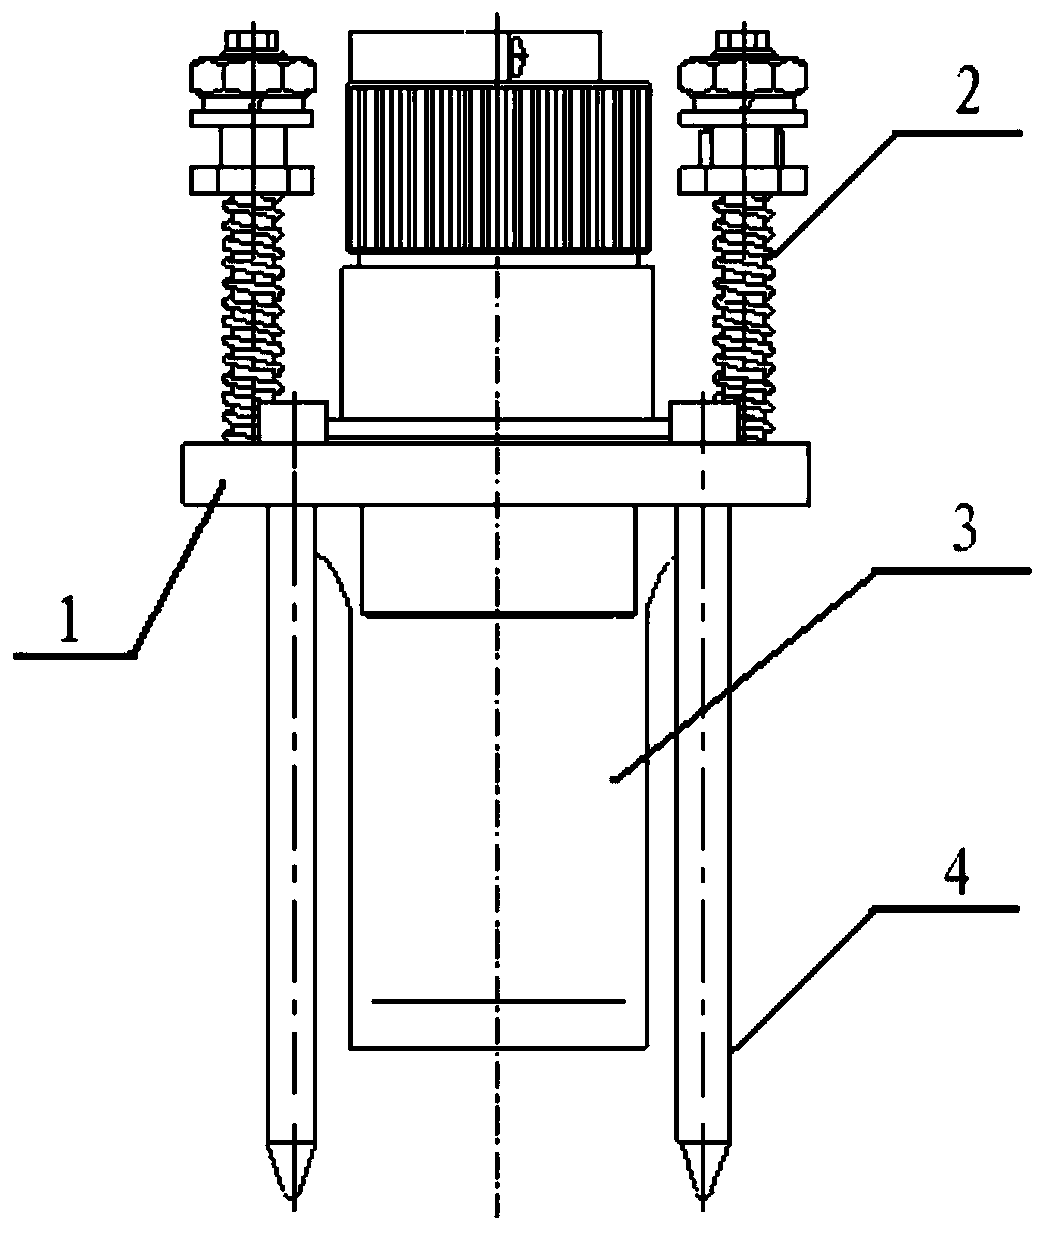 Reliable blind-mating electrical connector and blind-mating method